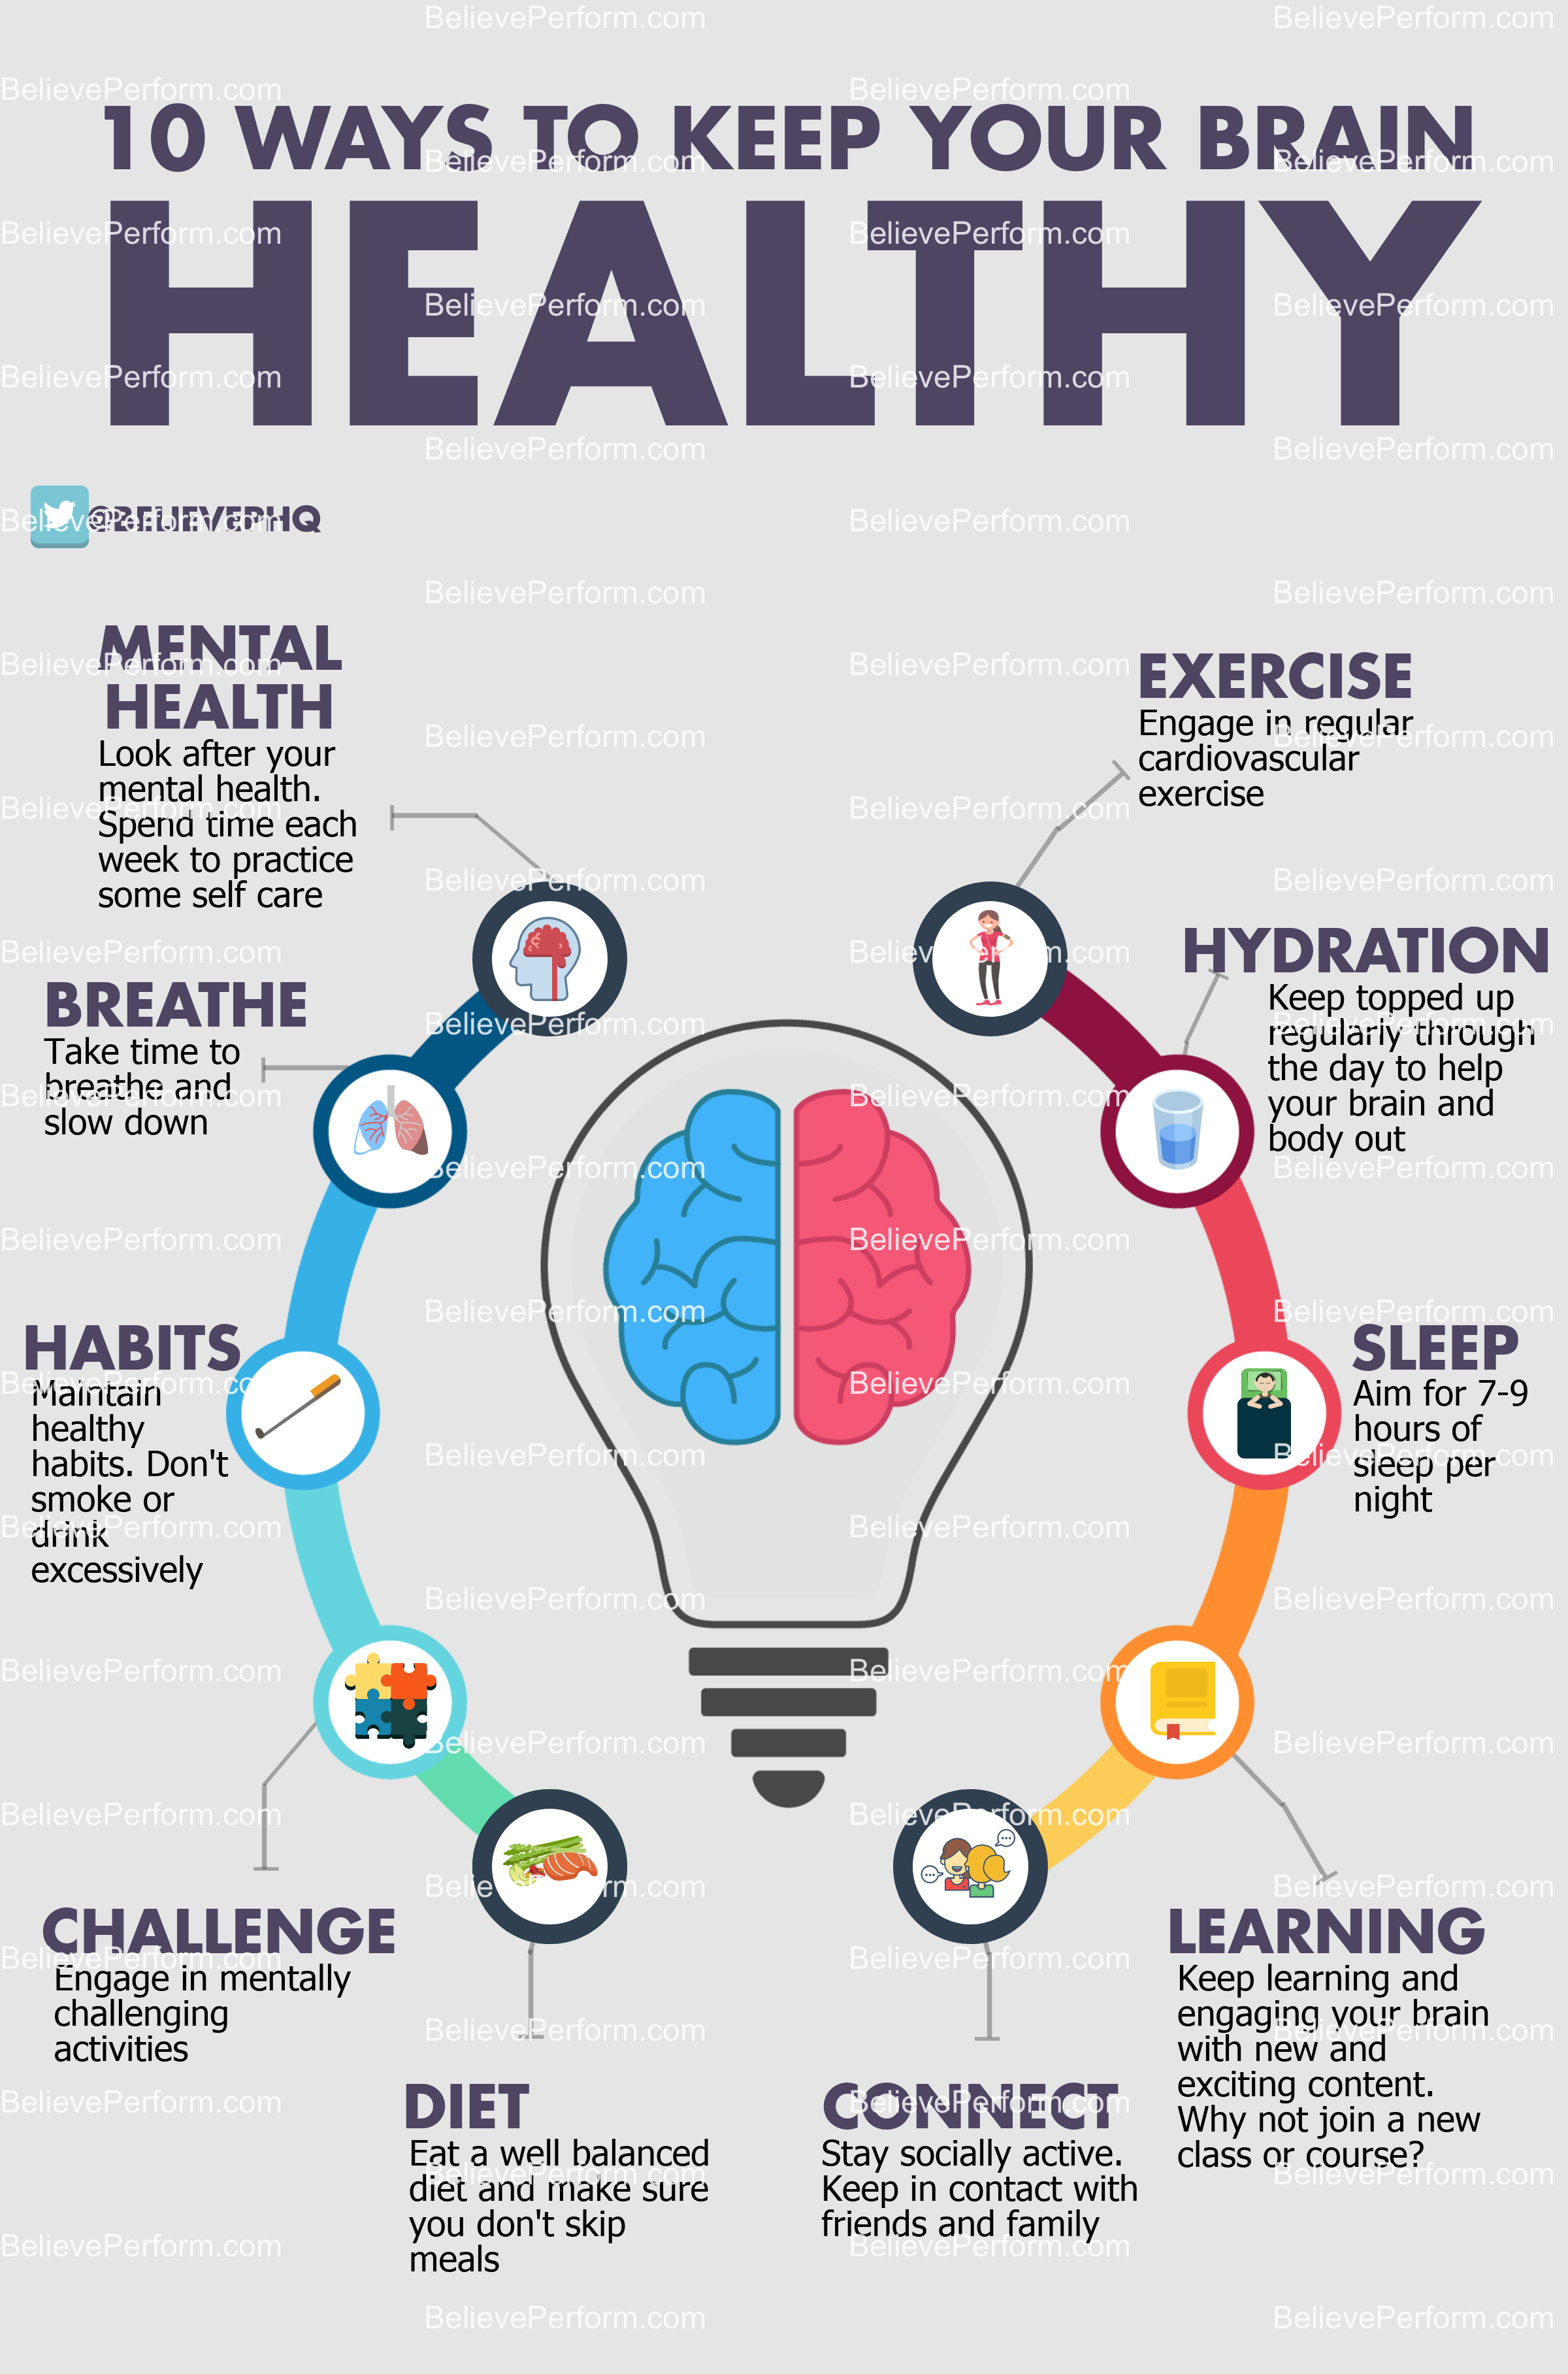 10 ways to keep your brain healthy - BelievePerform - The ...